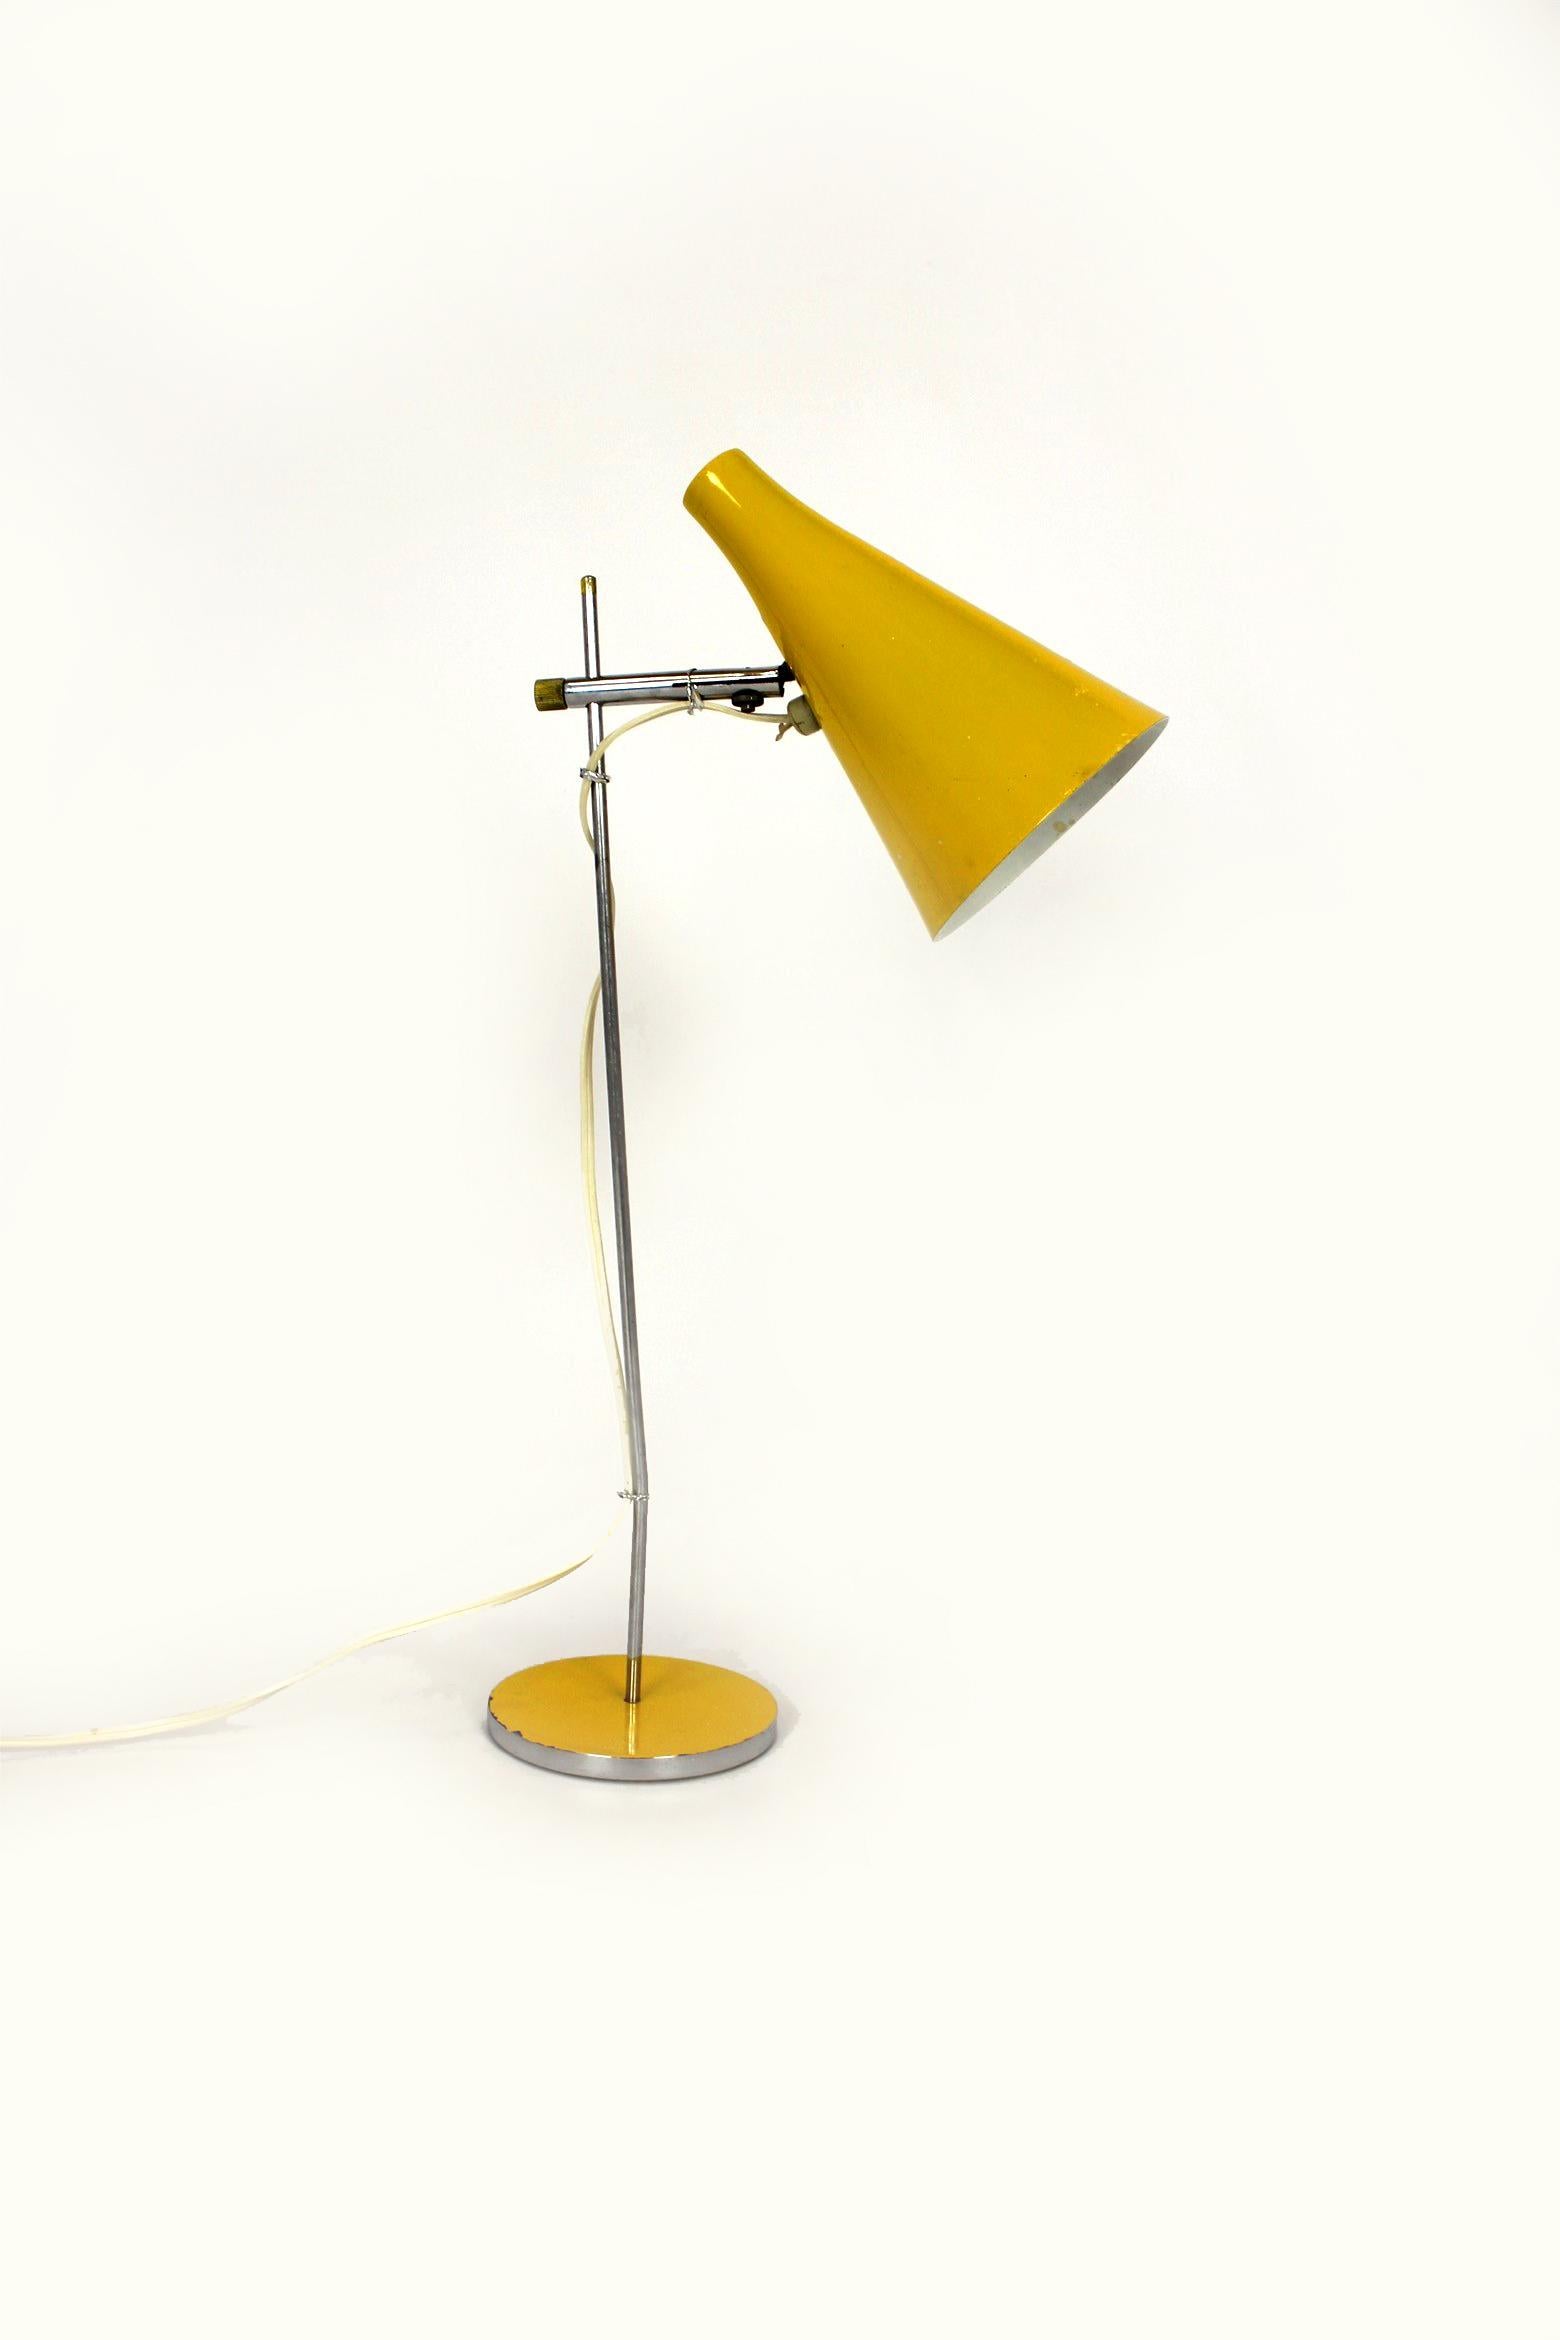 This table lamp was designed by Josef Hurka and produced by Lidokov in the 1970's. The lampshade is adjustable. The lamp is in original working condition.